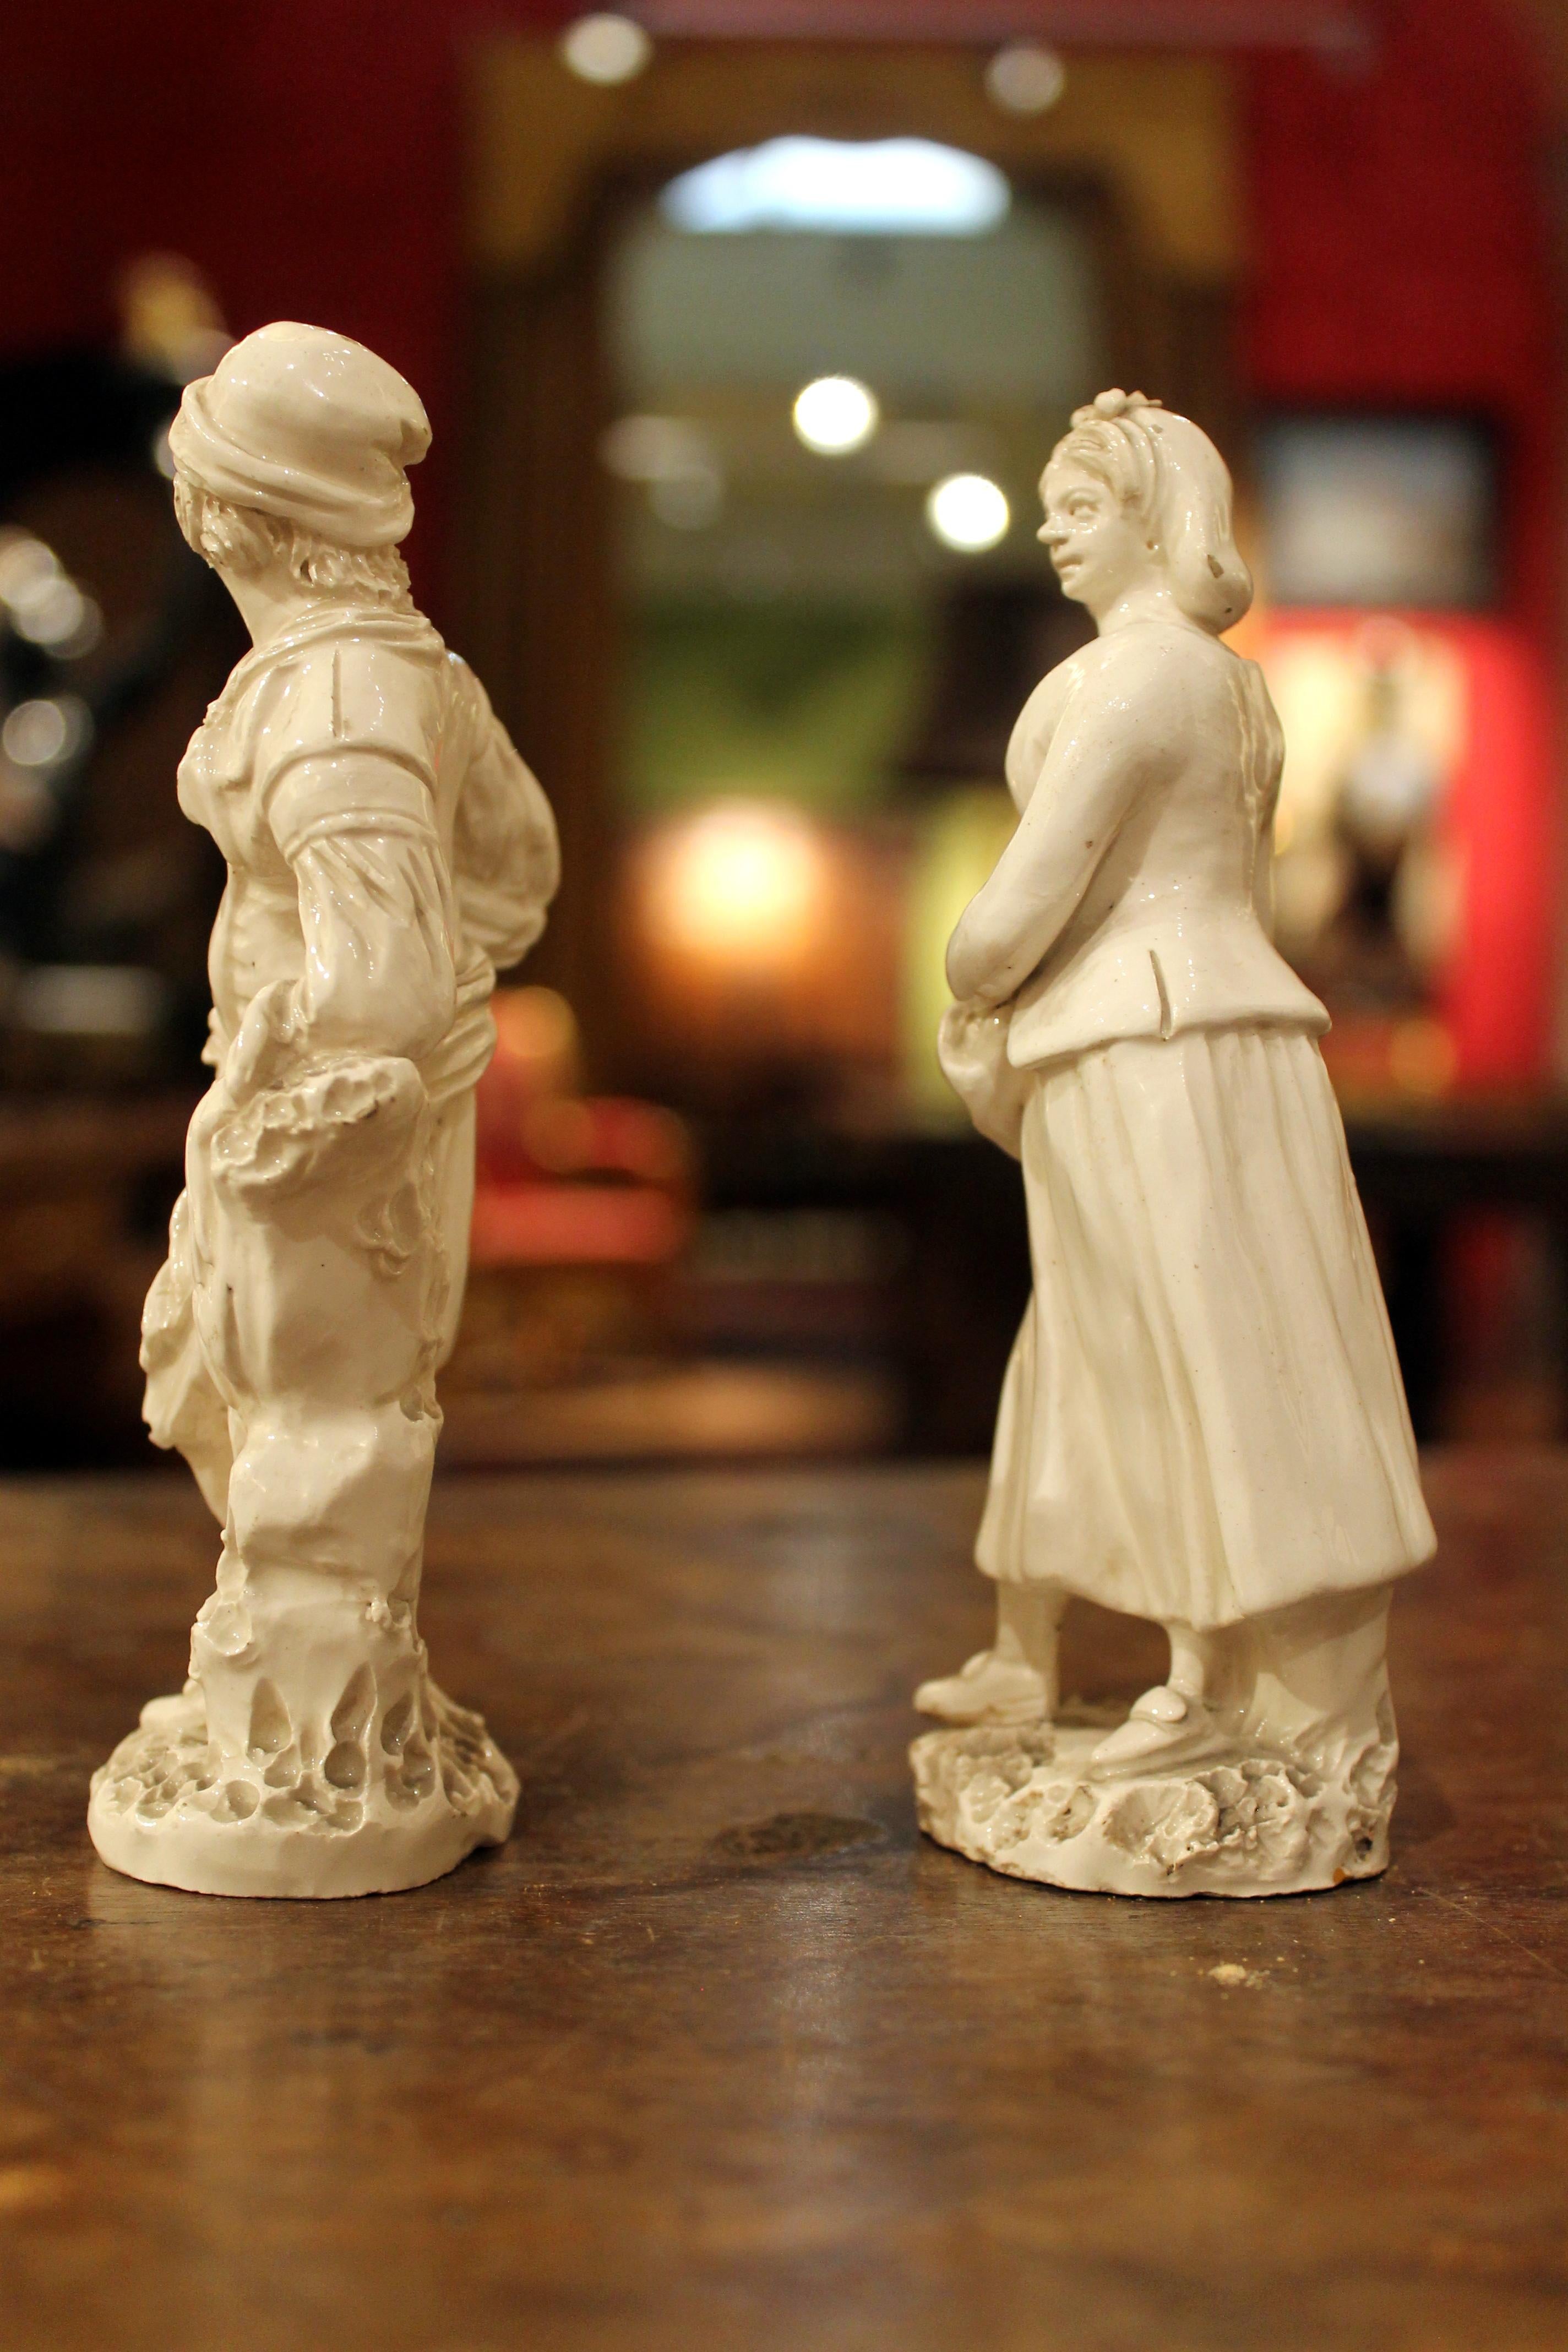 A pair of late 18th century Naples, real Fabbrica Ferdinandea, white porcelain figures of a lady and a man are hand modeled in the round. This lovely couple of statuettes in the white feature a fruit vendor and a peasant. The man, modelled in a